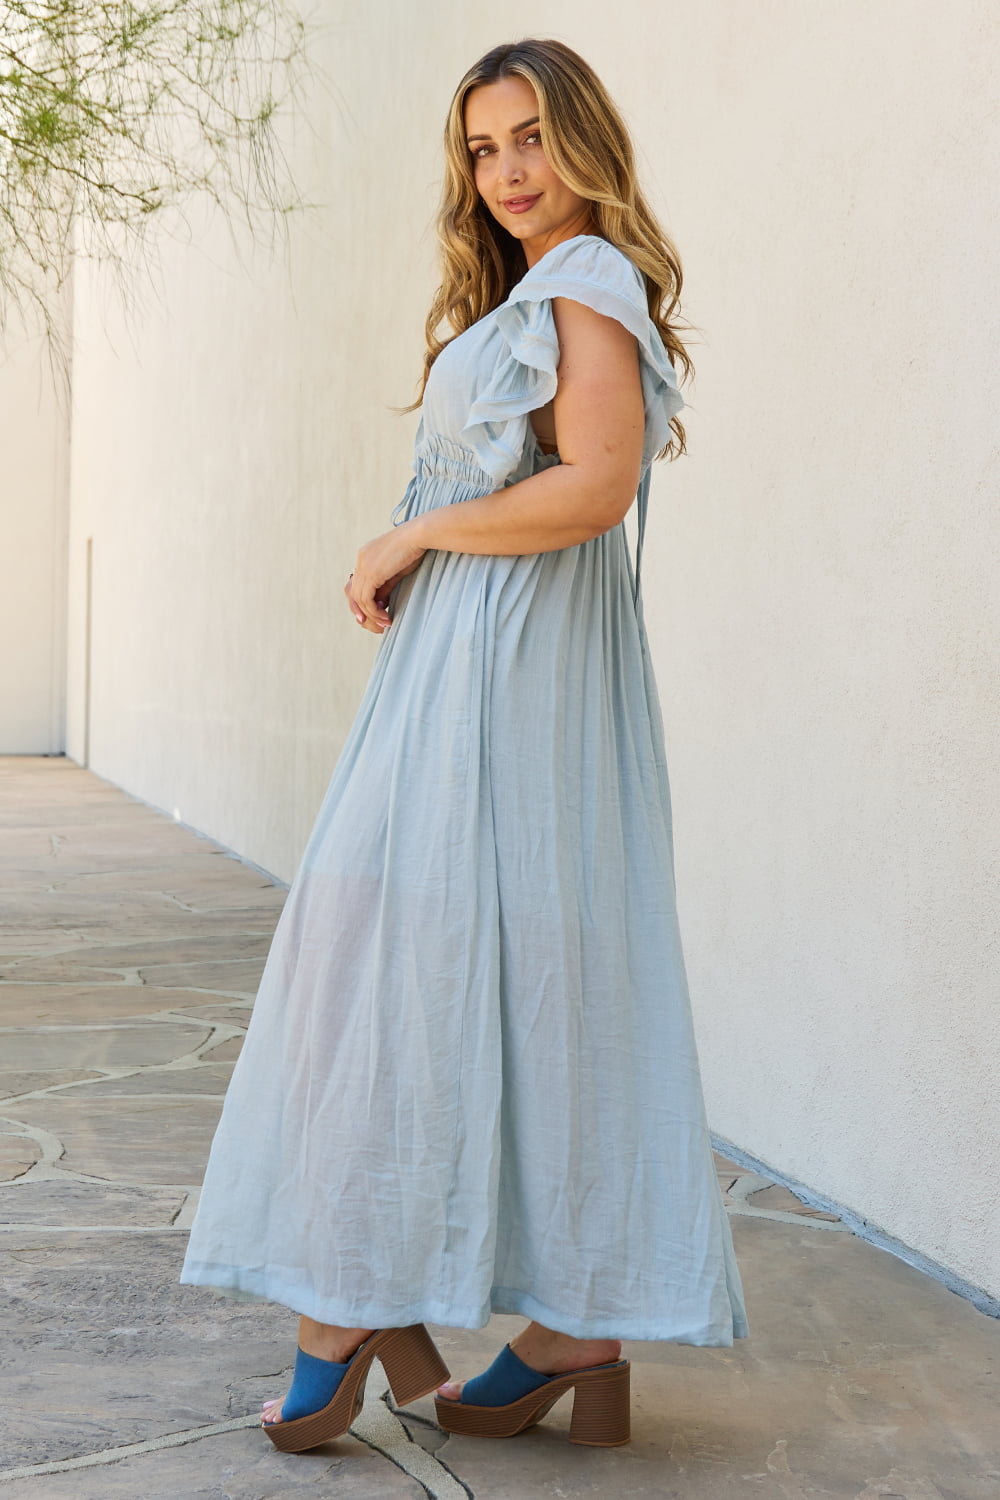 Butterfly Sleeve Maxi Dress - AnnRose Boutique